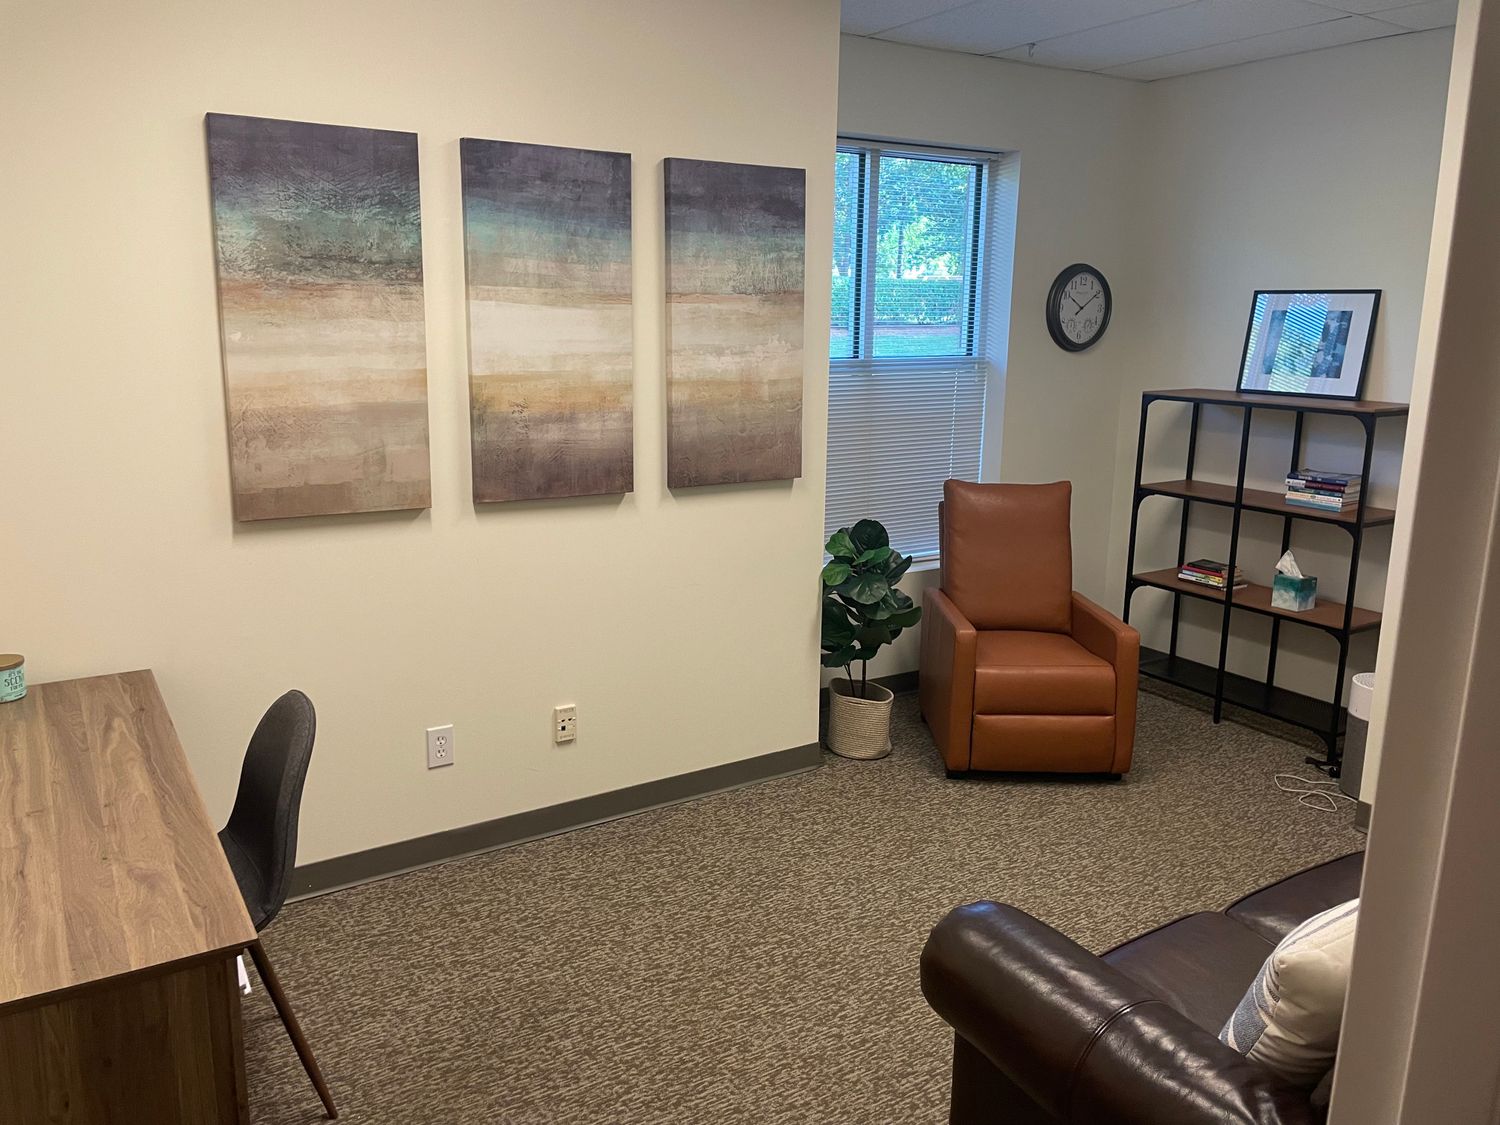 Gallery Photo of Counseling office 